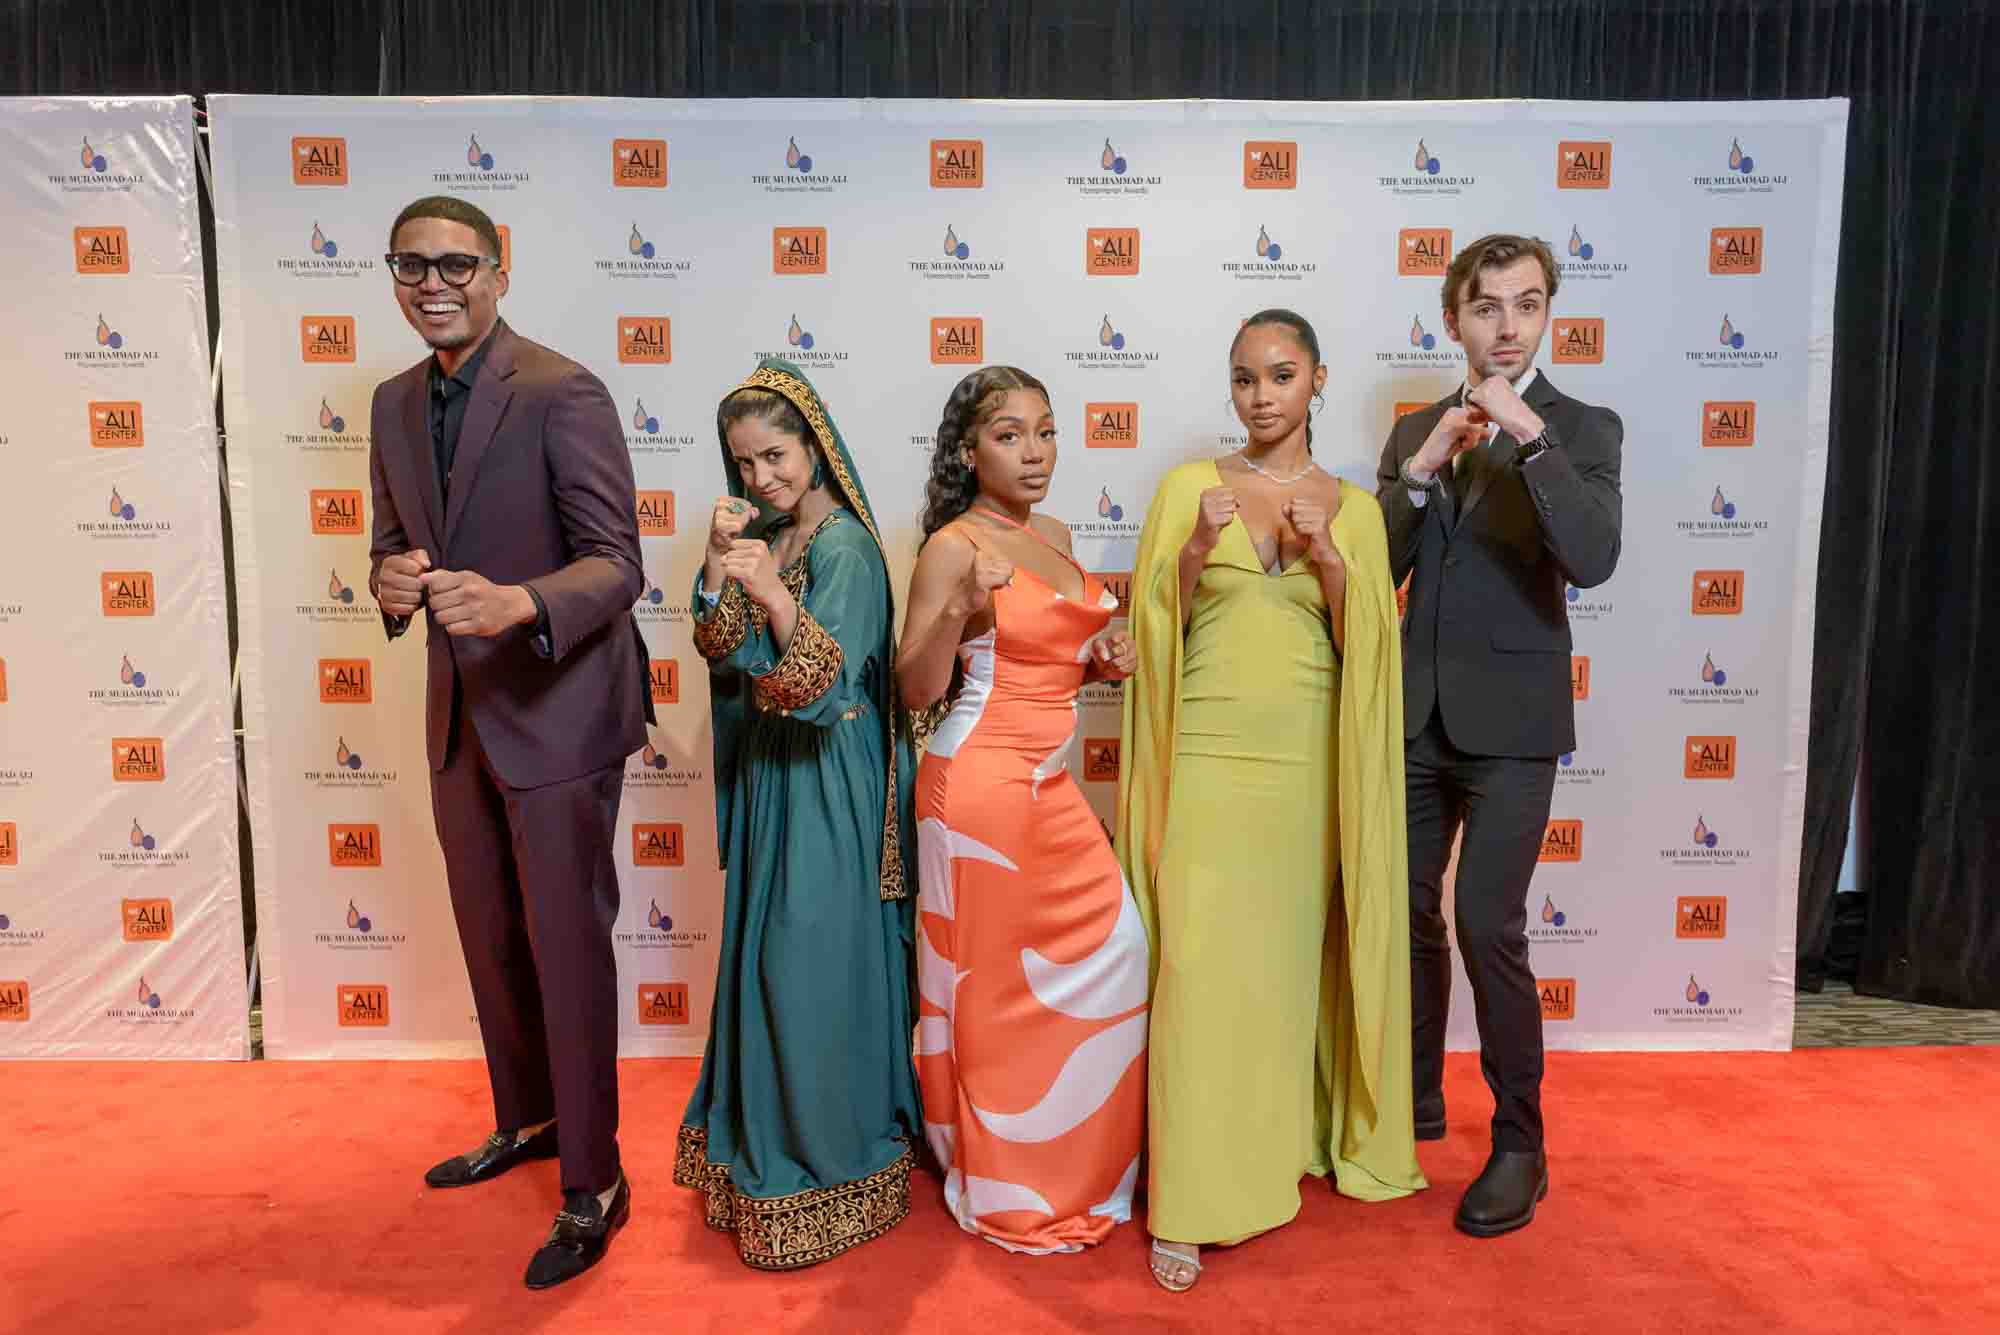 The recipients of four of the six Core Principle Awards, Darius Baxter, left, Sonita Alizada, Chelsea Miller, Nialah Edari and Christian Stephen strike a fighting pose on the red carpet at the eighth annual Muhammad Ali Humanitarian Awards Friday, November 12, 2021, at the Muhammad Ali Center in Louisville, Ky. The two other Core Principle Award winners, Clementine Jacoby and Yvette Ishimwe attended virtually. (Brian Bohannon/AP Images for Muhammad Ali Humanitarian Awards)